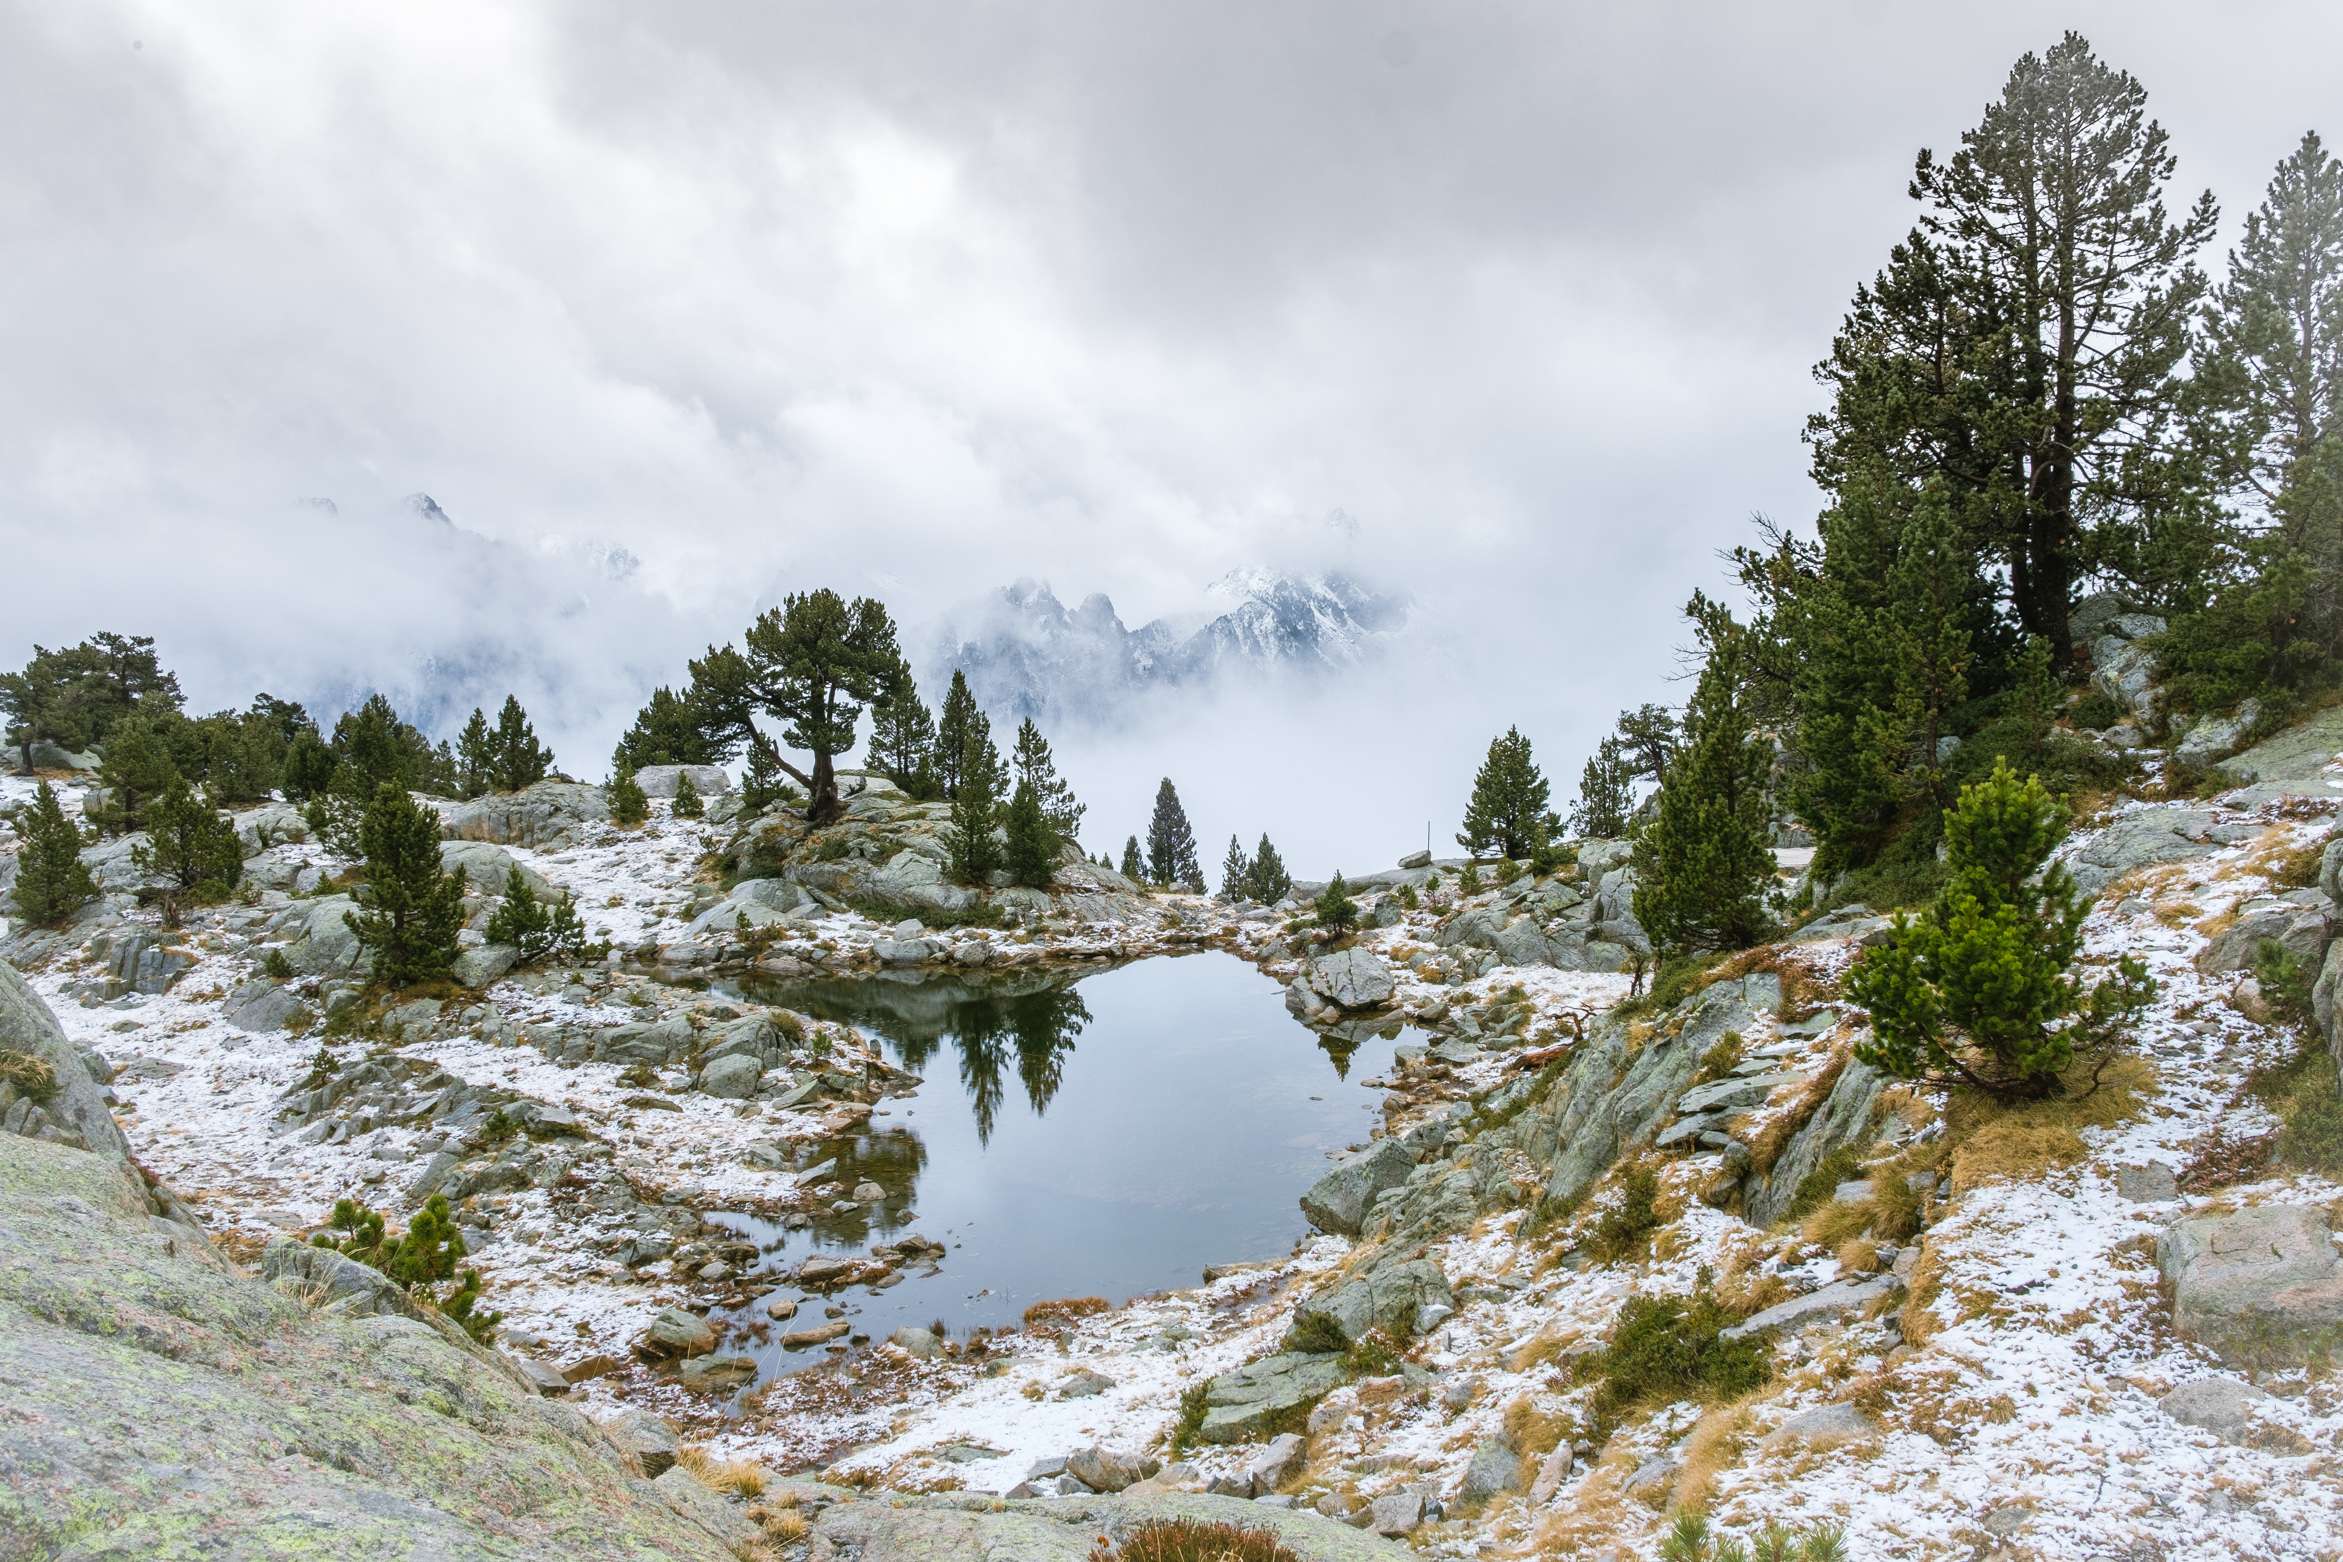 A small alpine lake in Aigüestortes i Estany of Saint Maurici national park lake reflecting trees, cloudy mountains in background